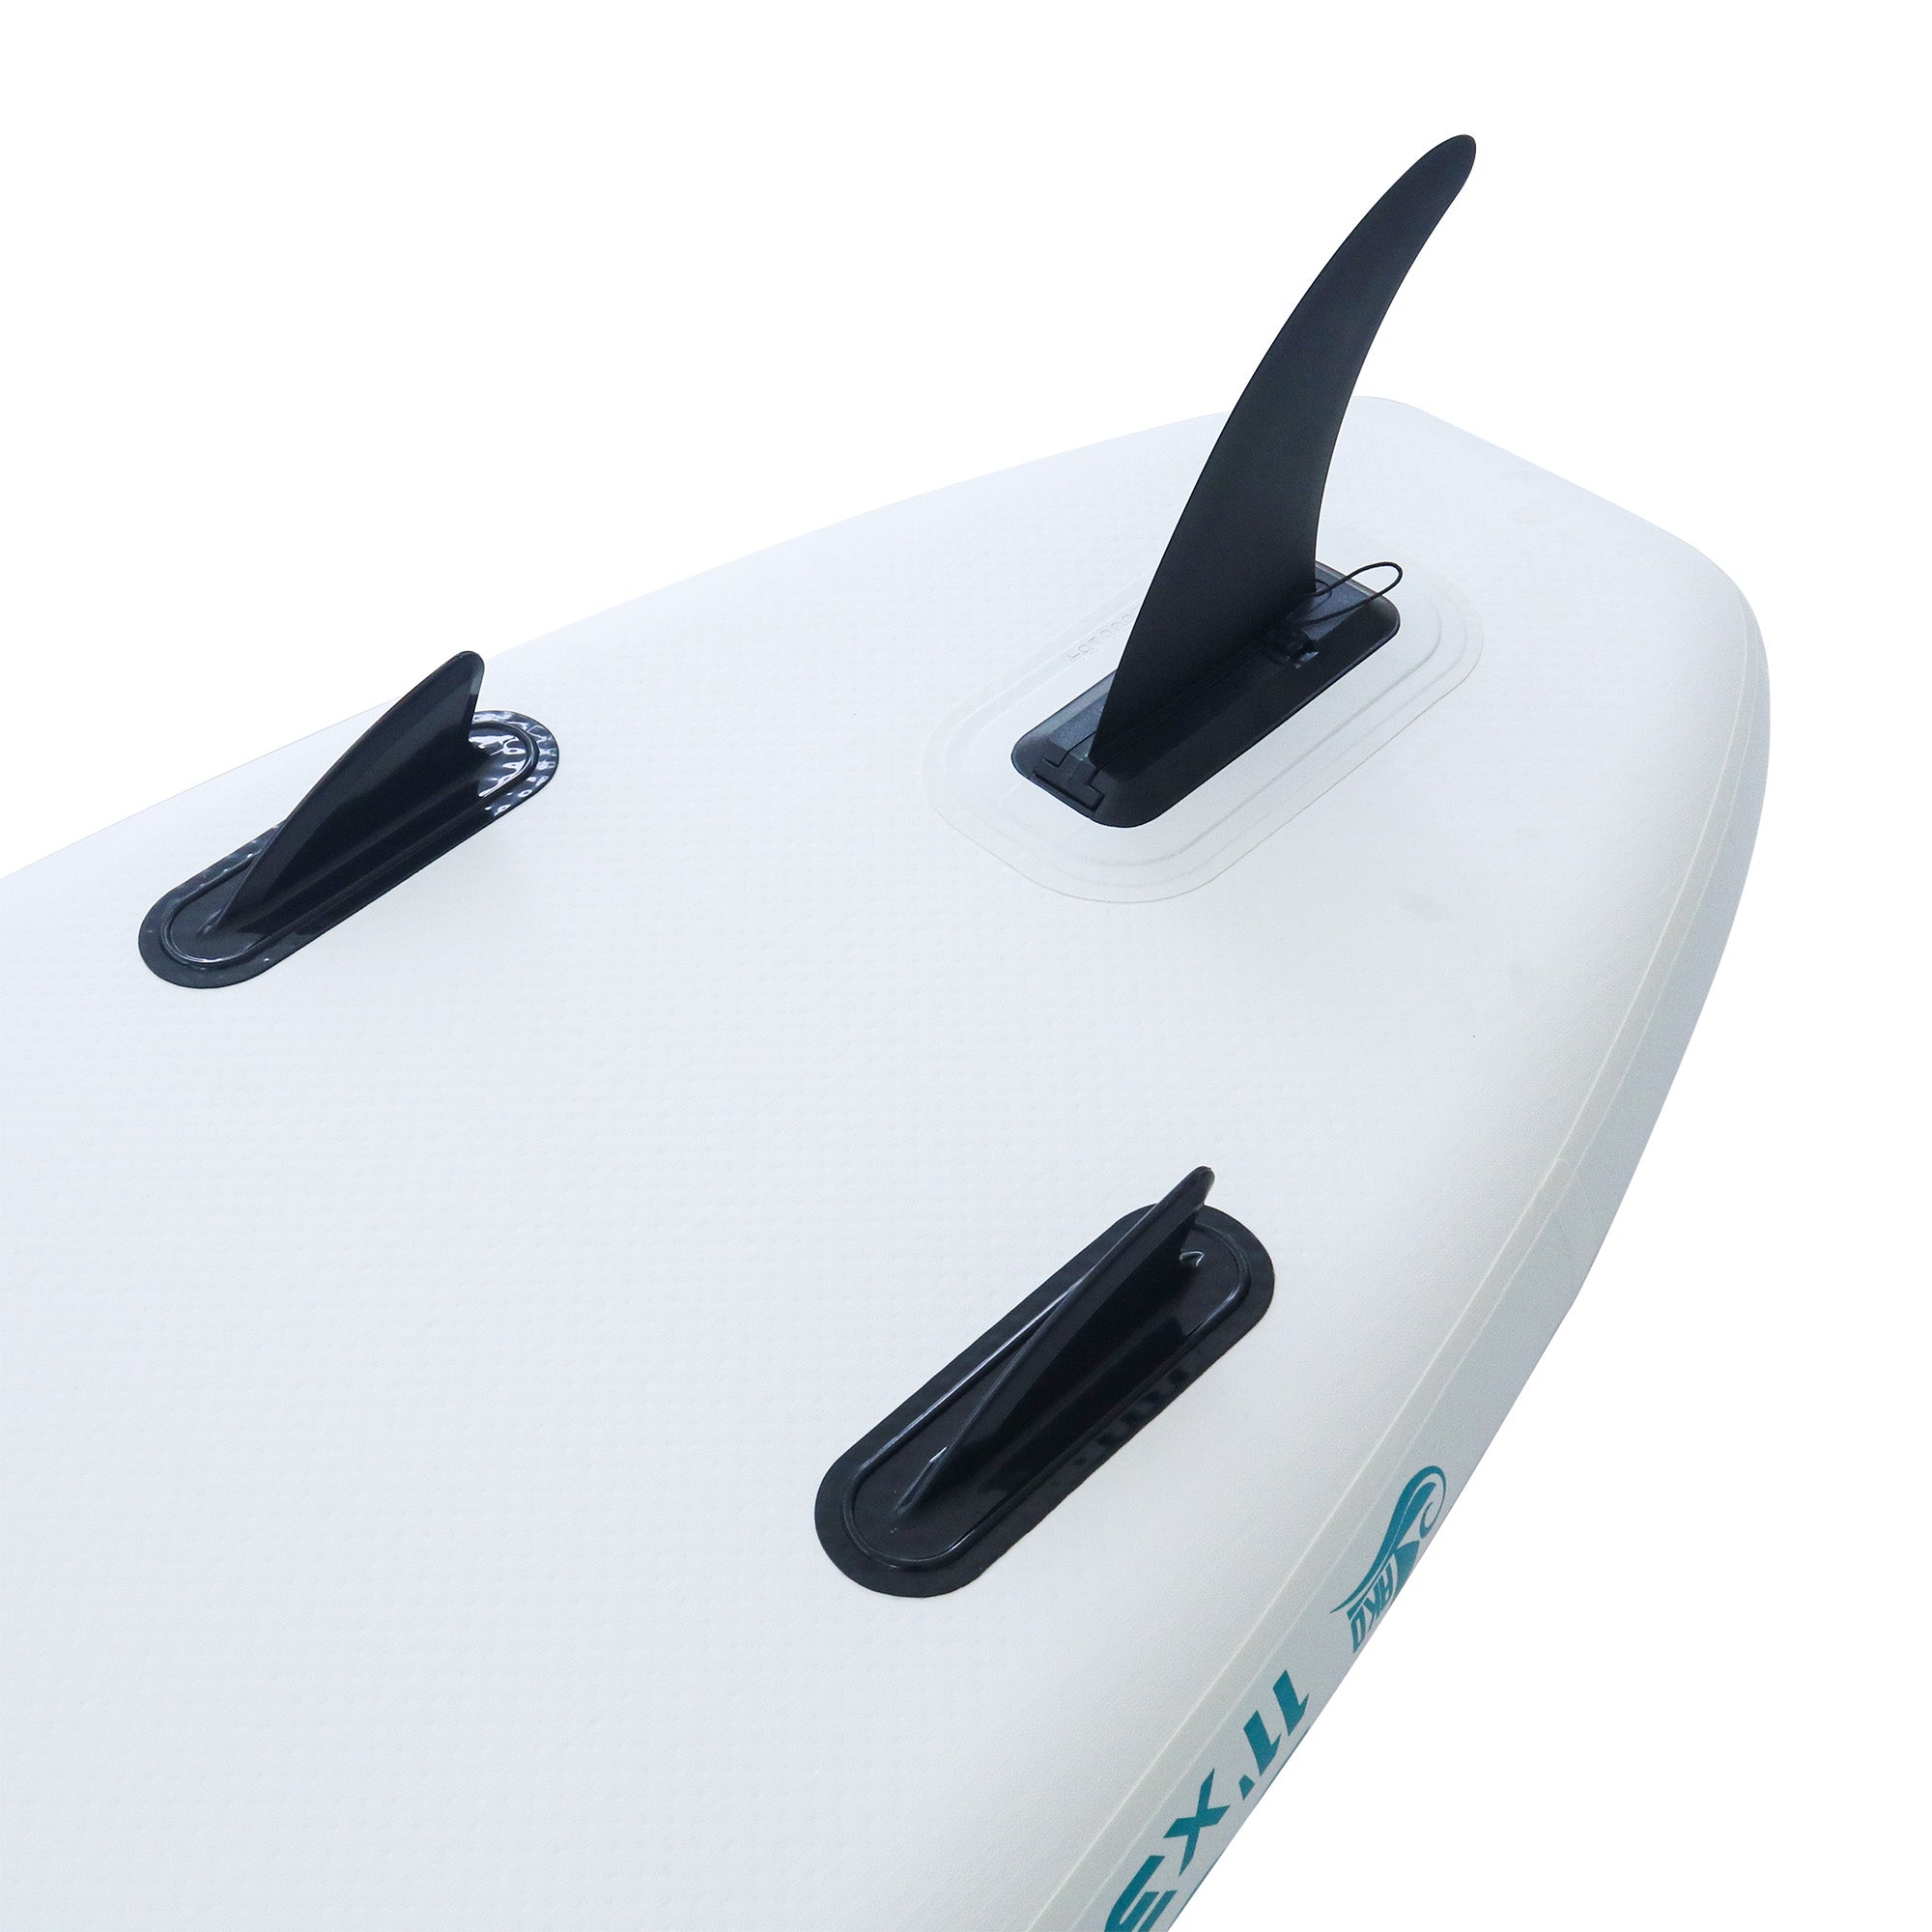 AKD DOLPHIN Stand Up Paddle Board 11' 335x83x15cm SUP Board 170kg/346L (Cyan)